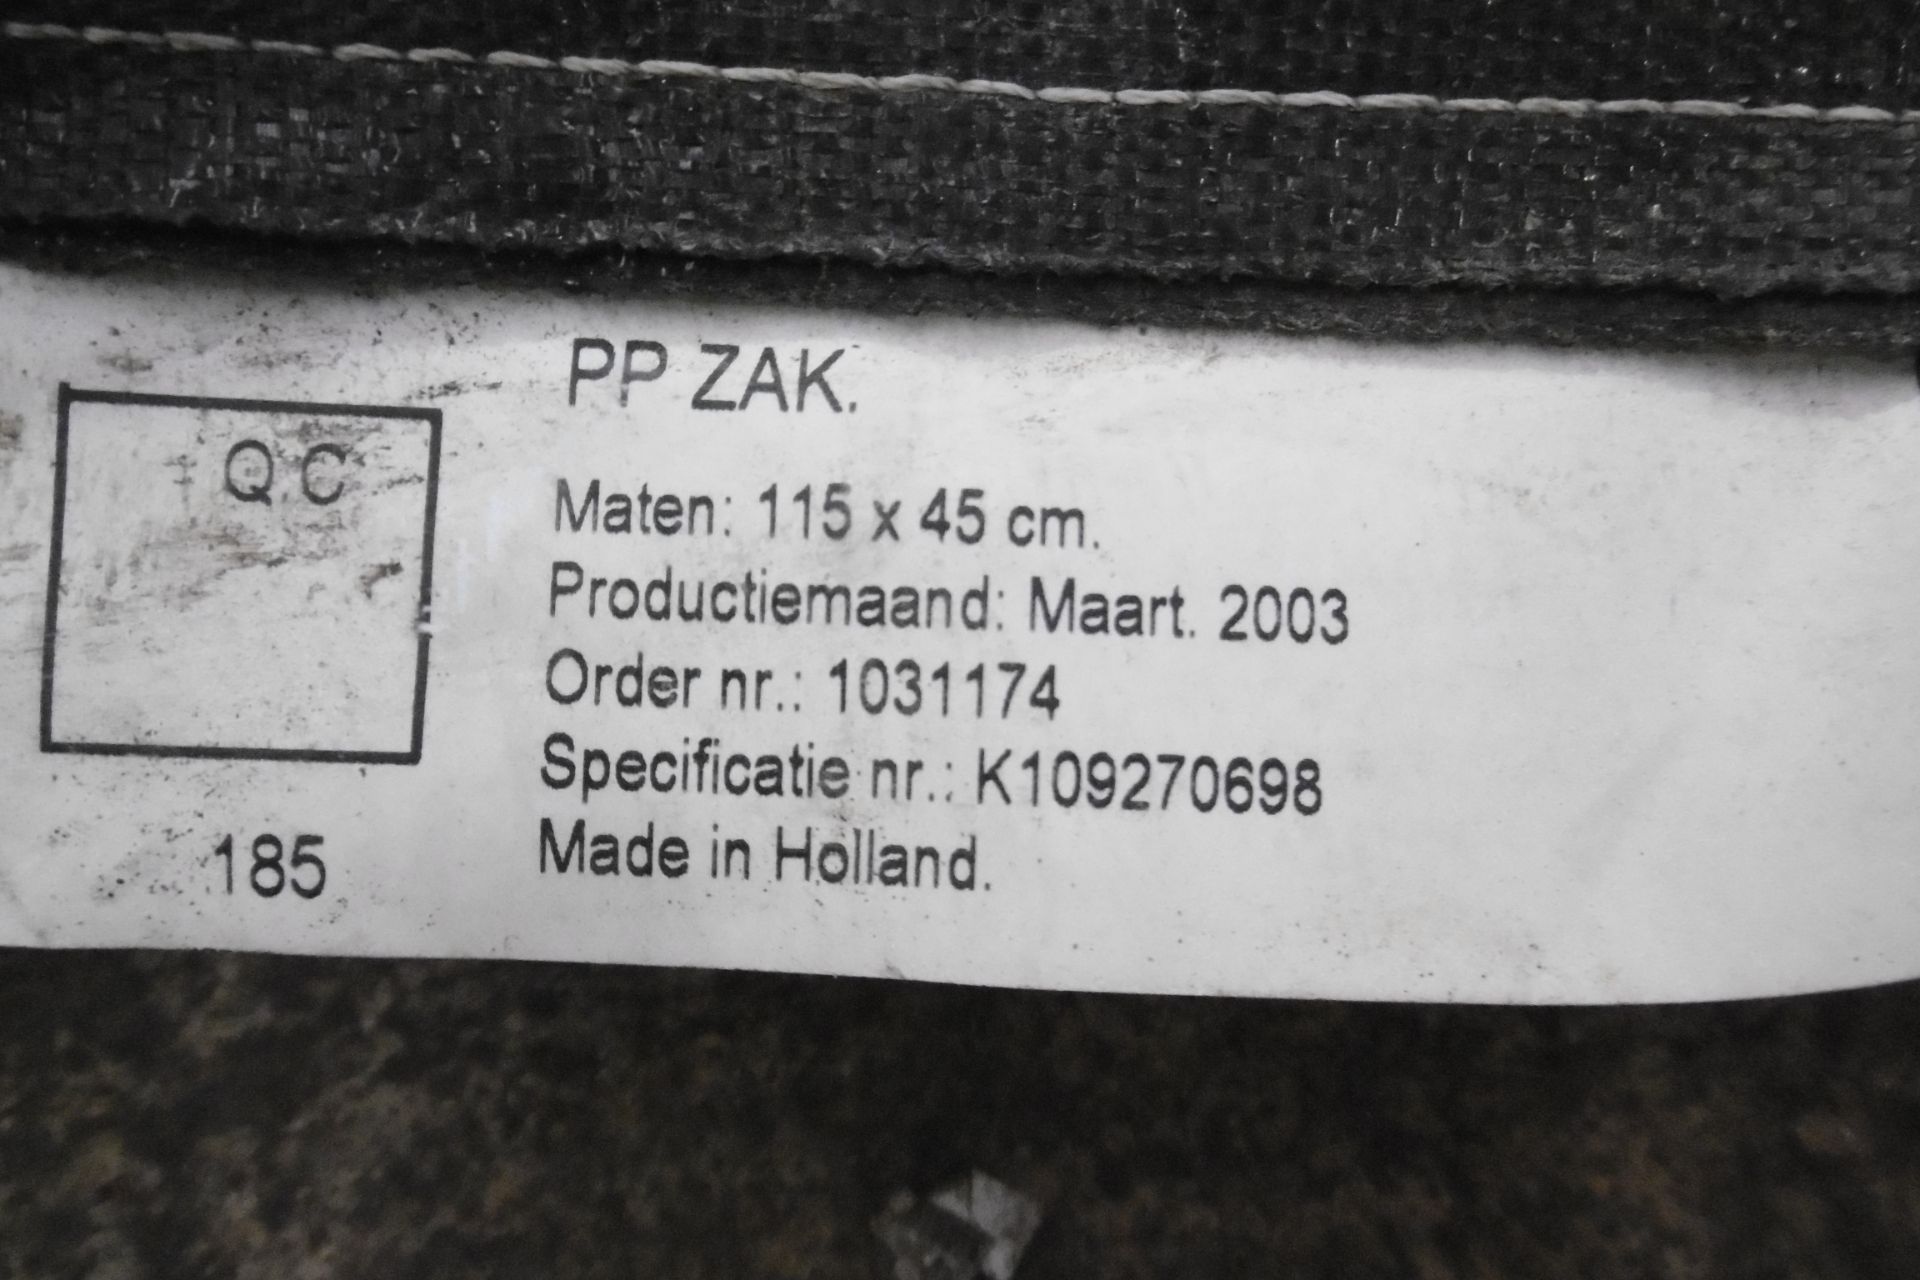 2 x PP Zak Traction Mats - Image 4 of 7